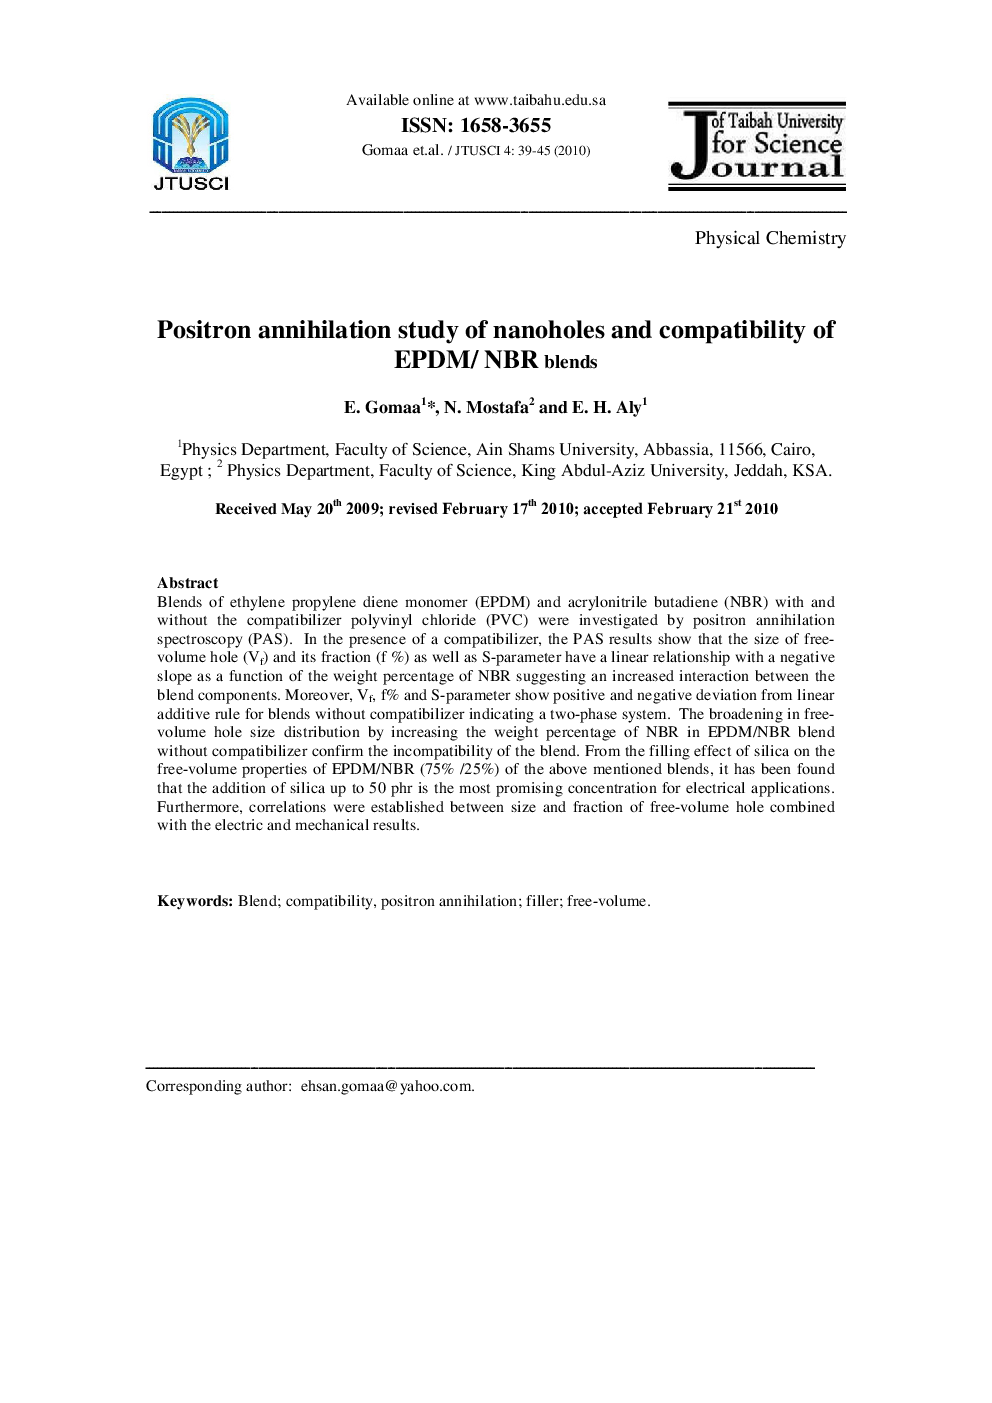 Positron annihilation study of nanoholes and compatibility of EPDM/NBR blends